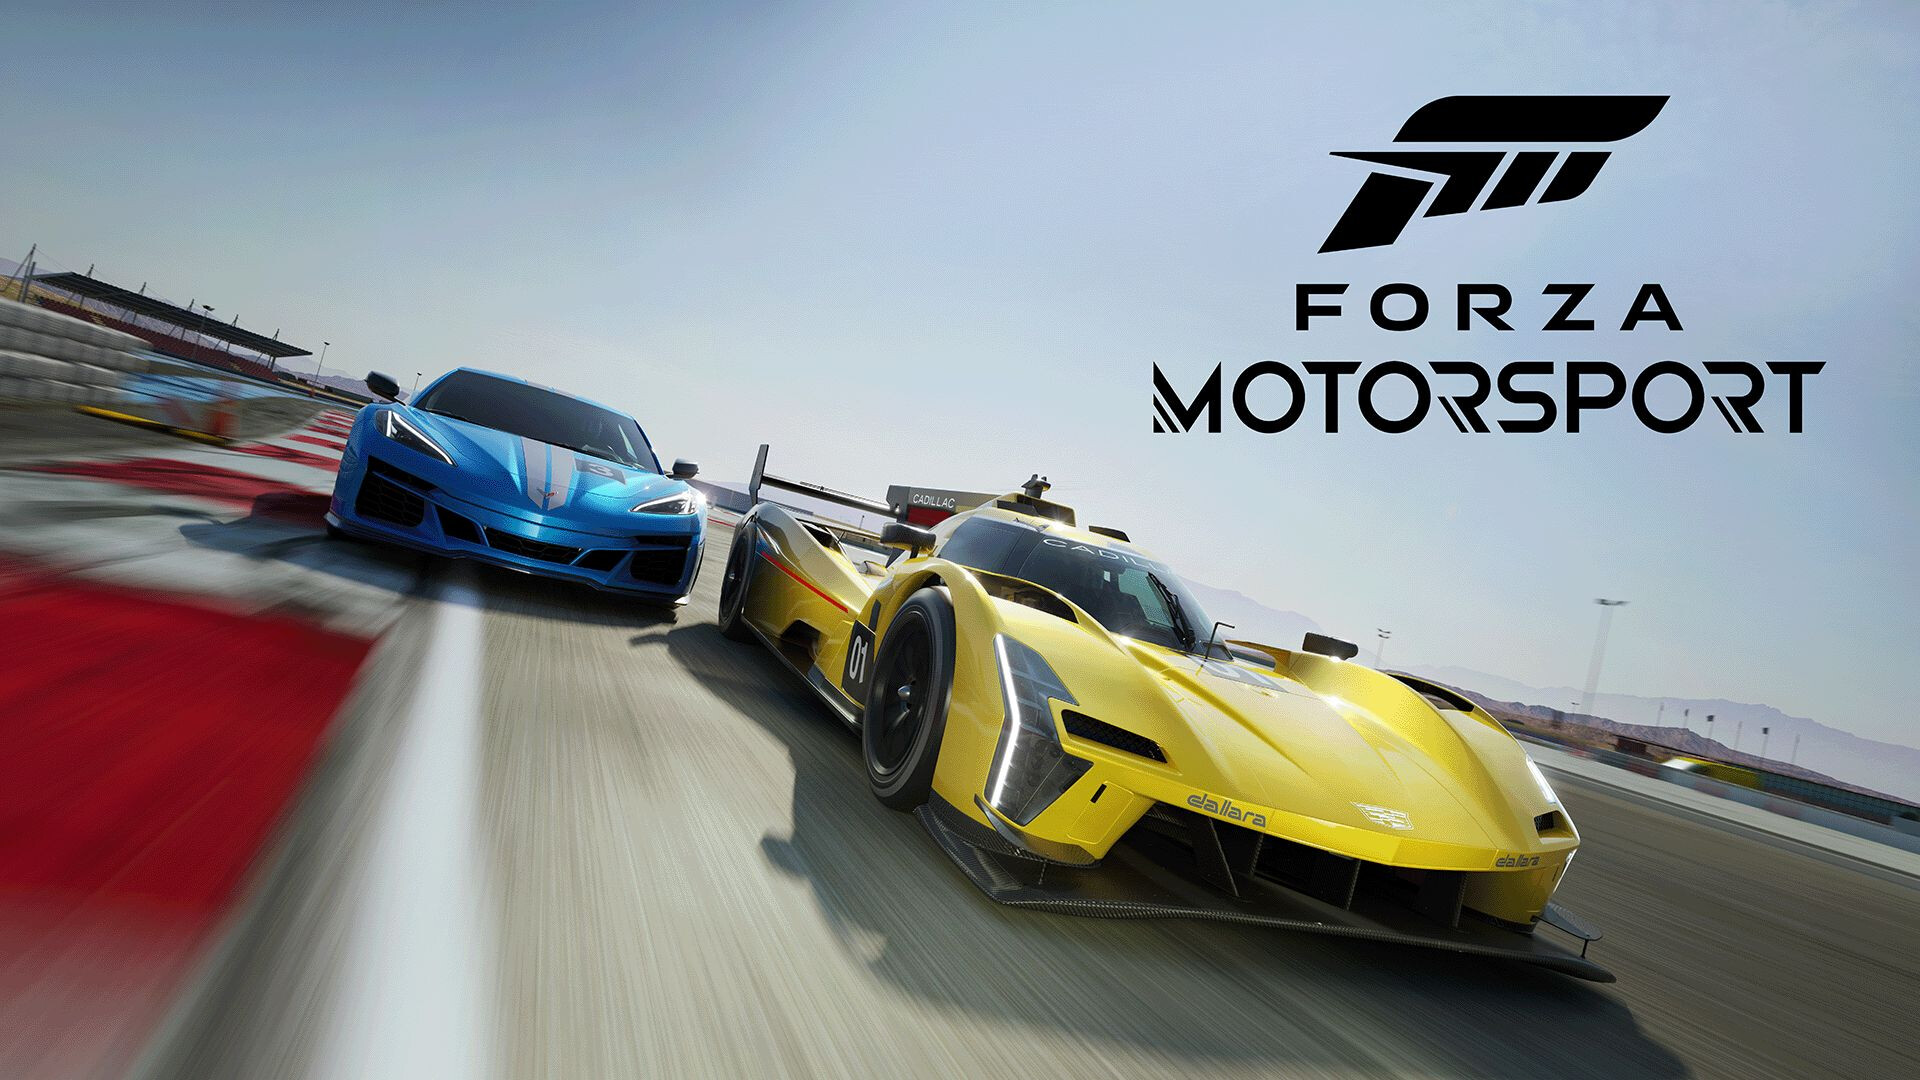 Forza Horizon 5 Available Now with Xbox Game Pass - Xbox Wire